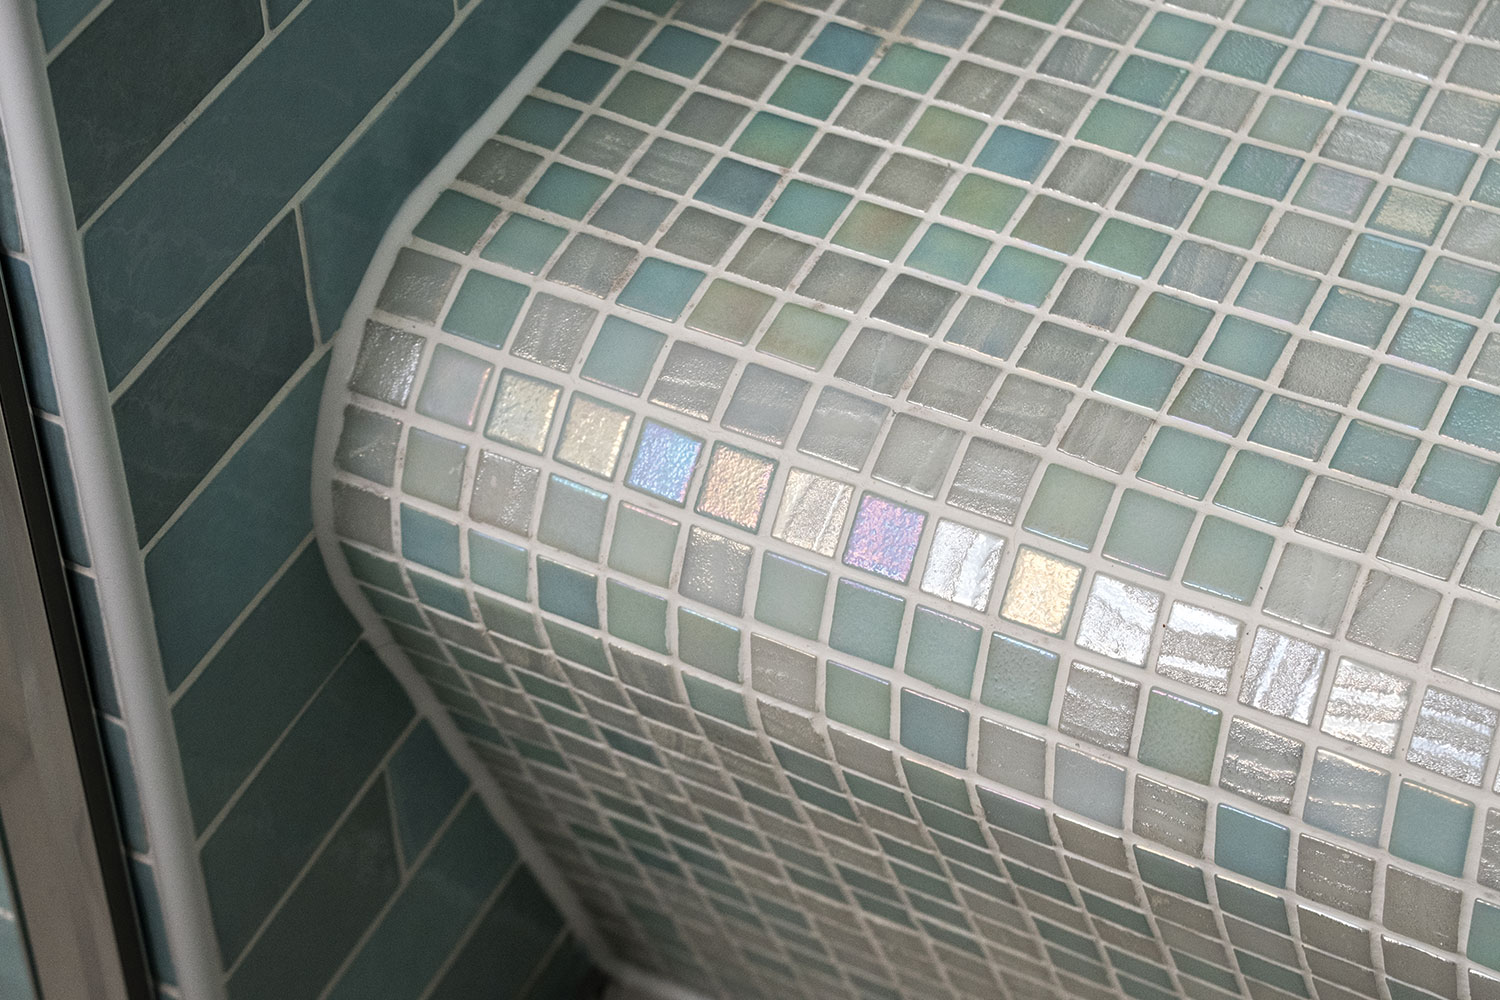 Gorgeous mosaic detail on the wet room shower seat.